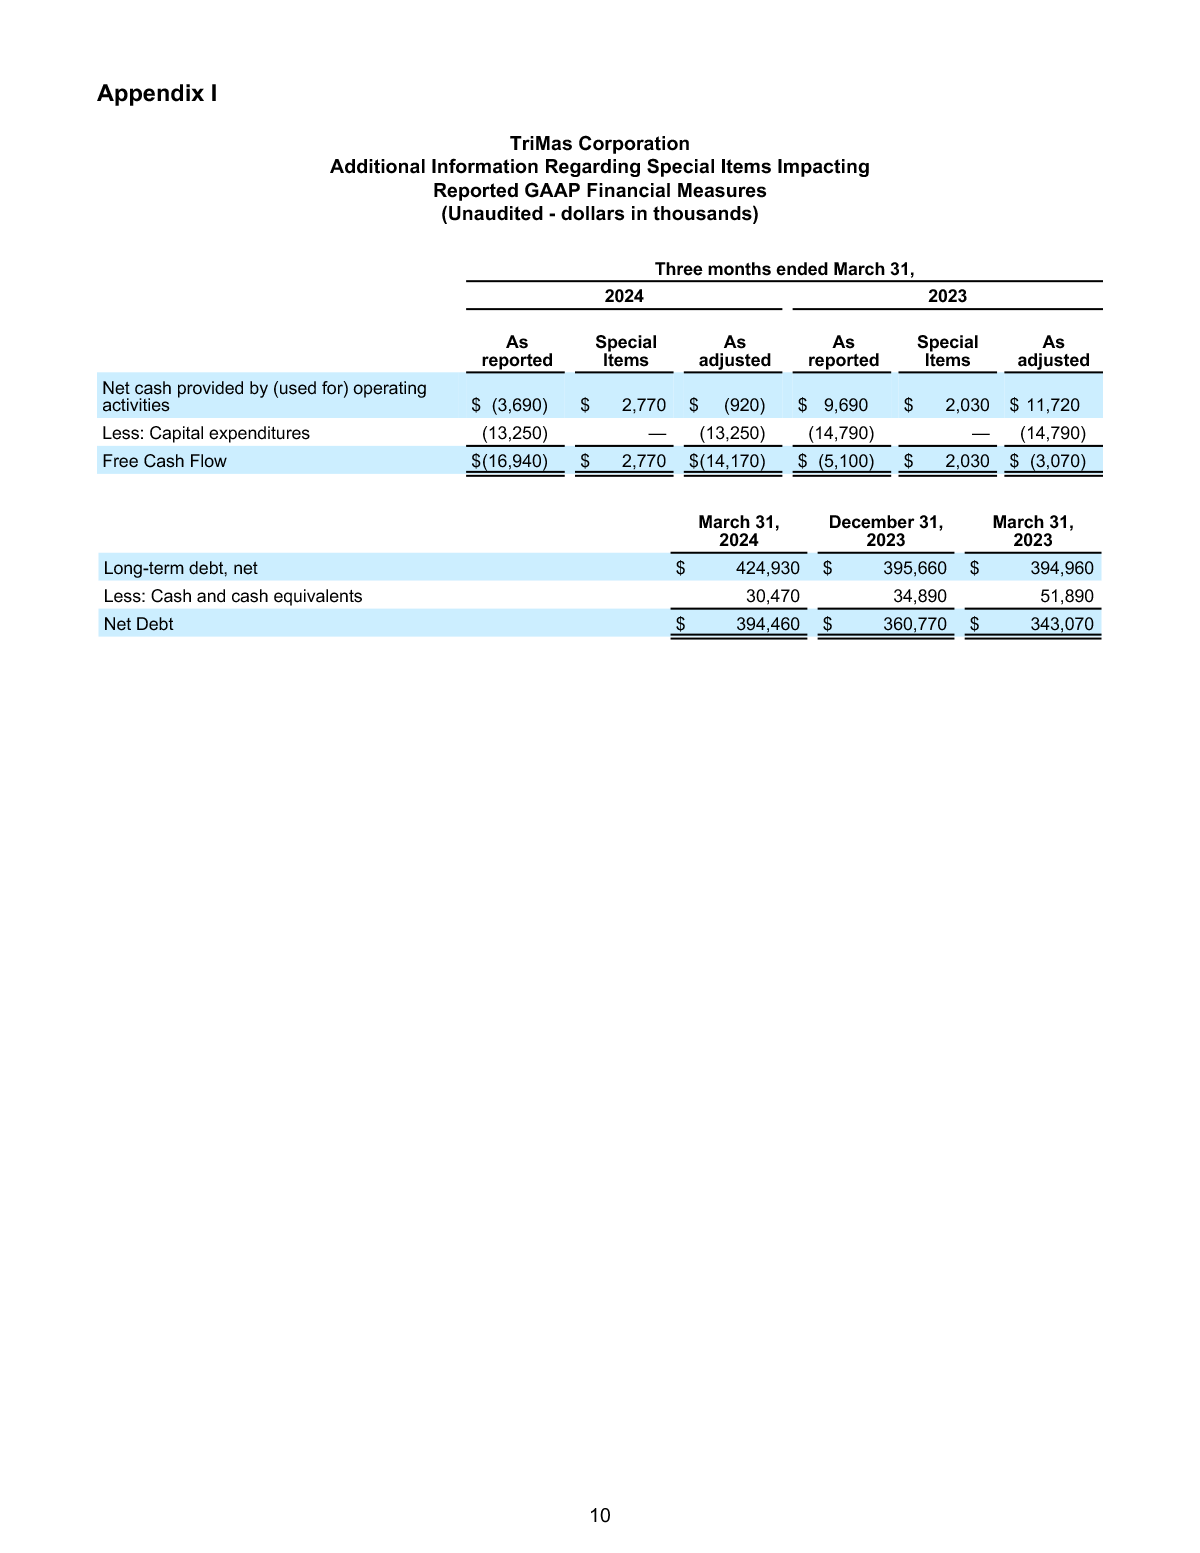 FINAL 4 30 24 Q1 Earnings Release page 10 image